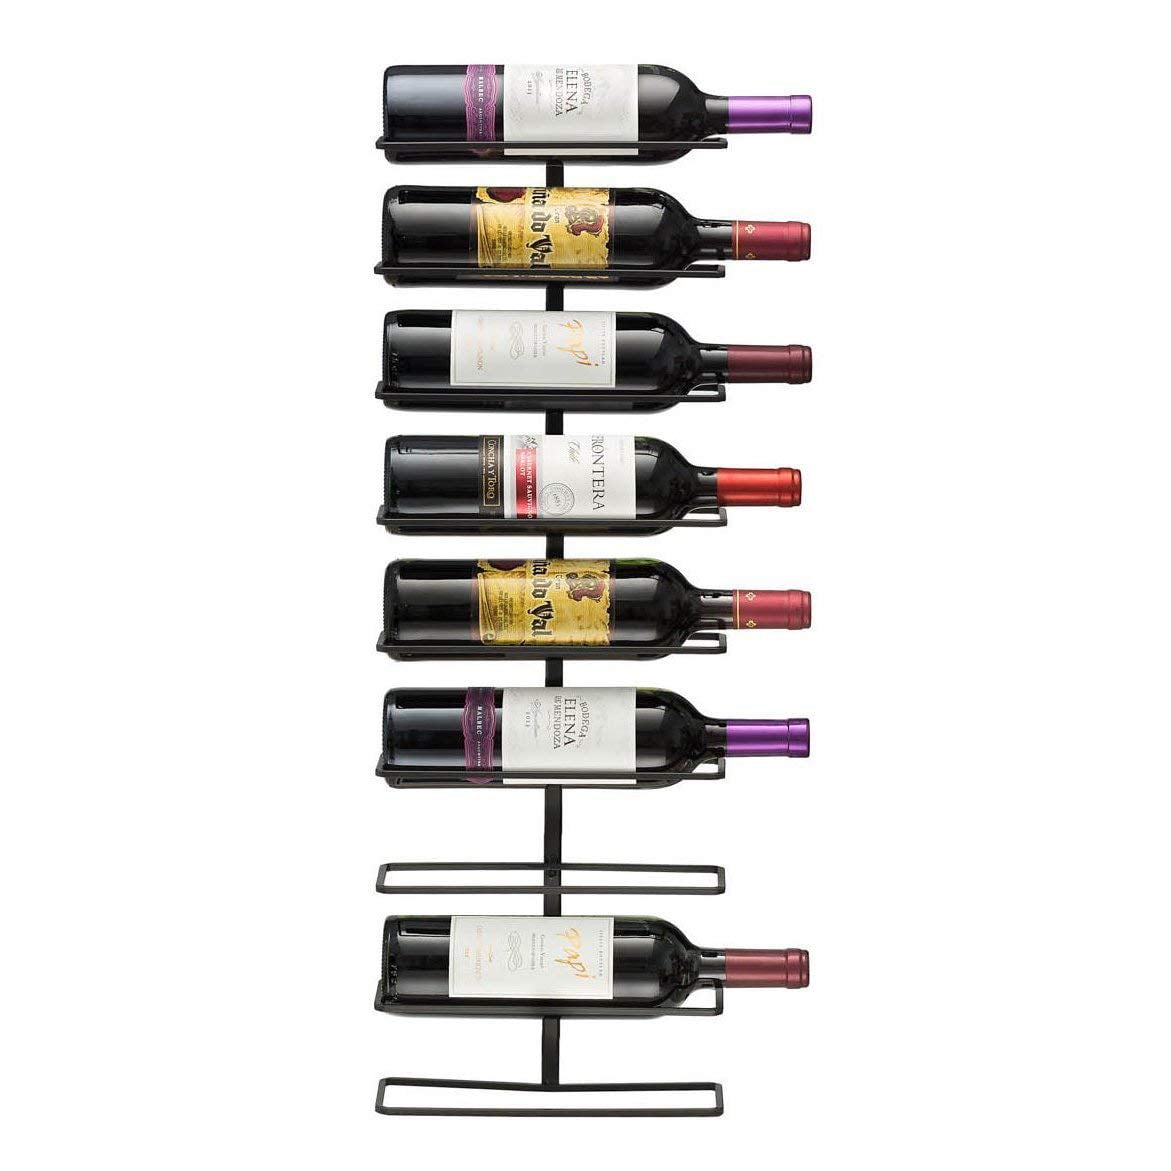 Sleek and Chic Looking Stores 8 Bottles of Wine Grey Wood Minimal Assembly Required Sorbus Wine Rack Butterfly 